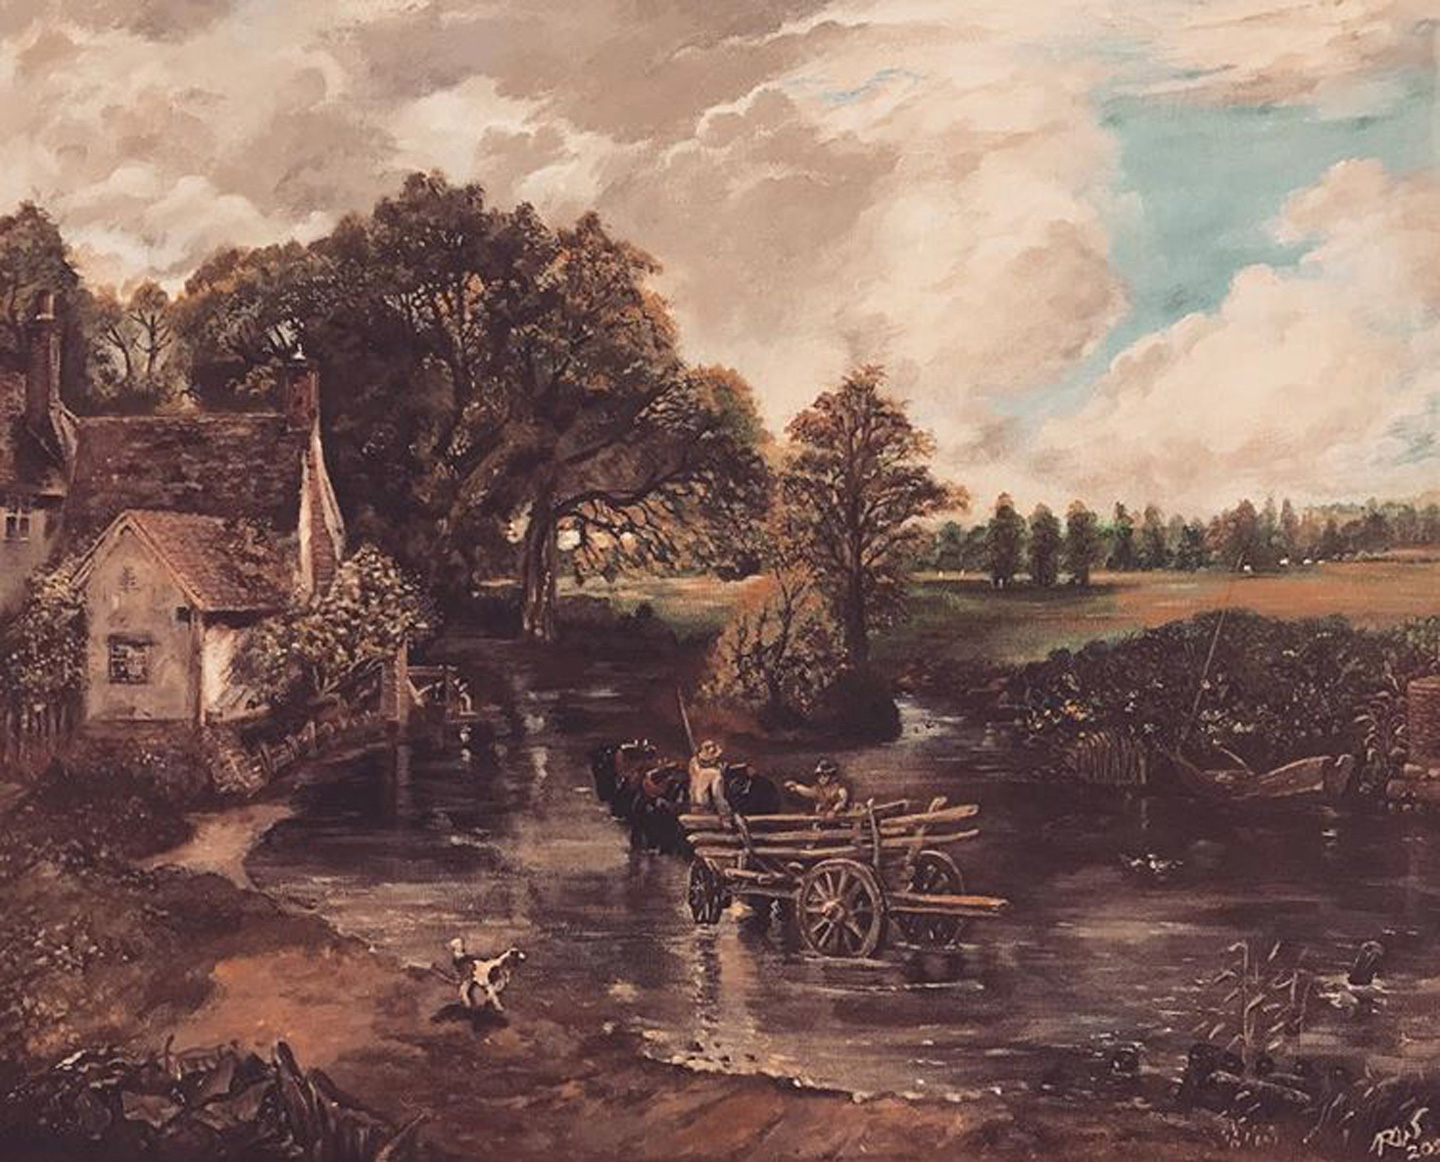 Dr. Wong's rendition of John Constable's <em>The Hay Wain</em> of 1821